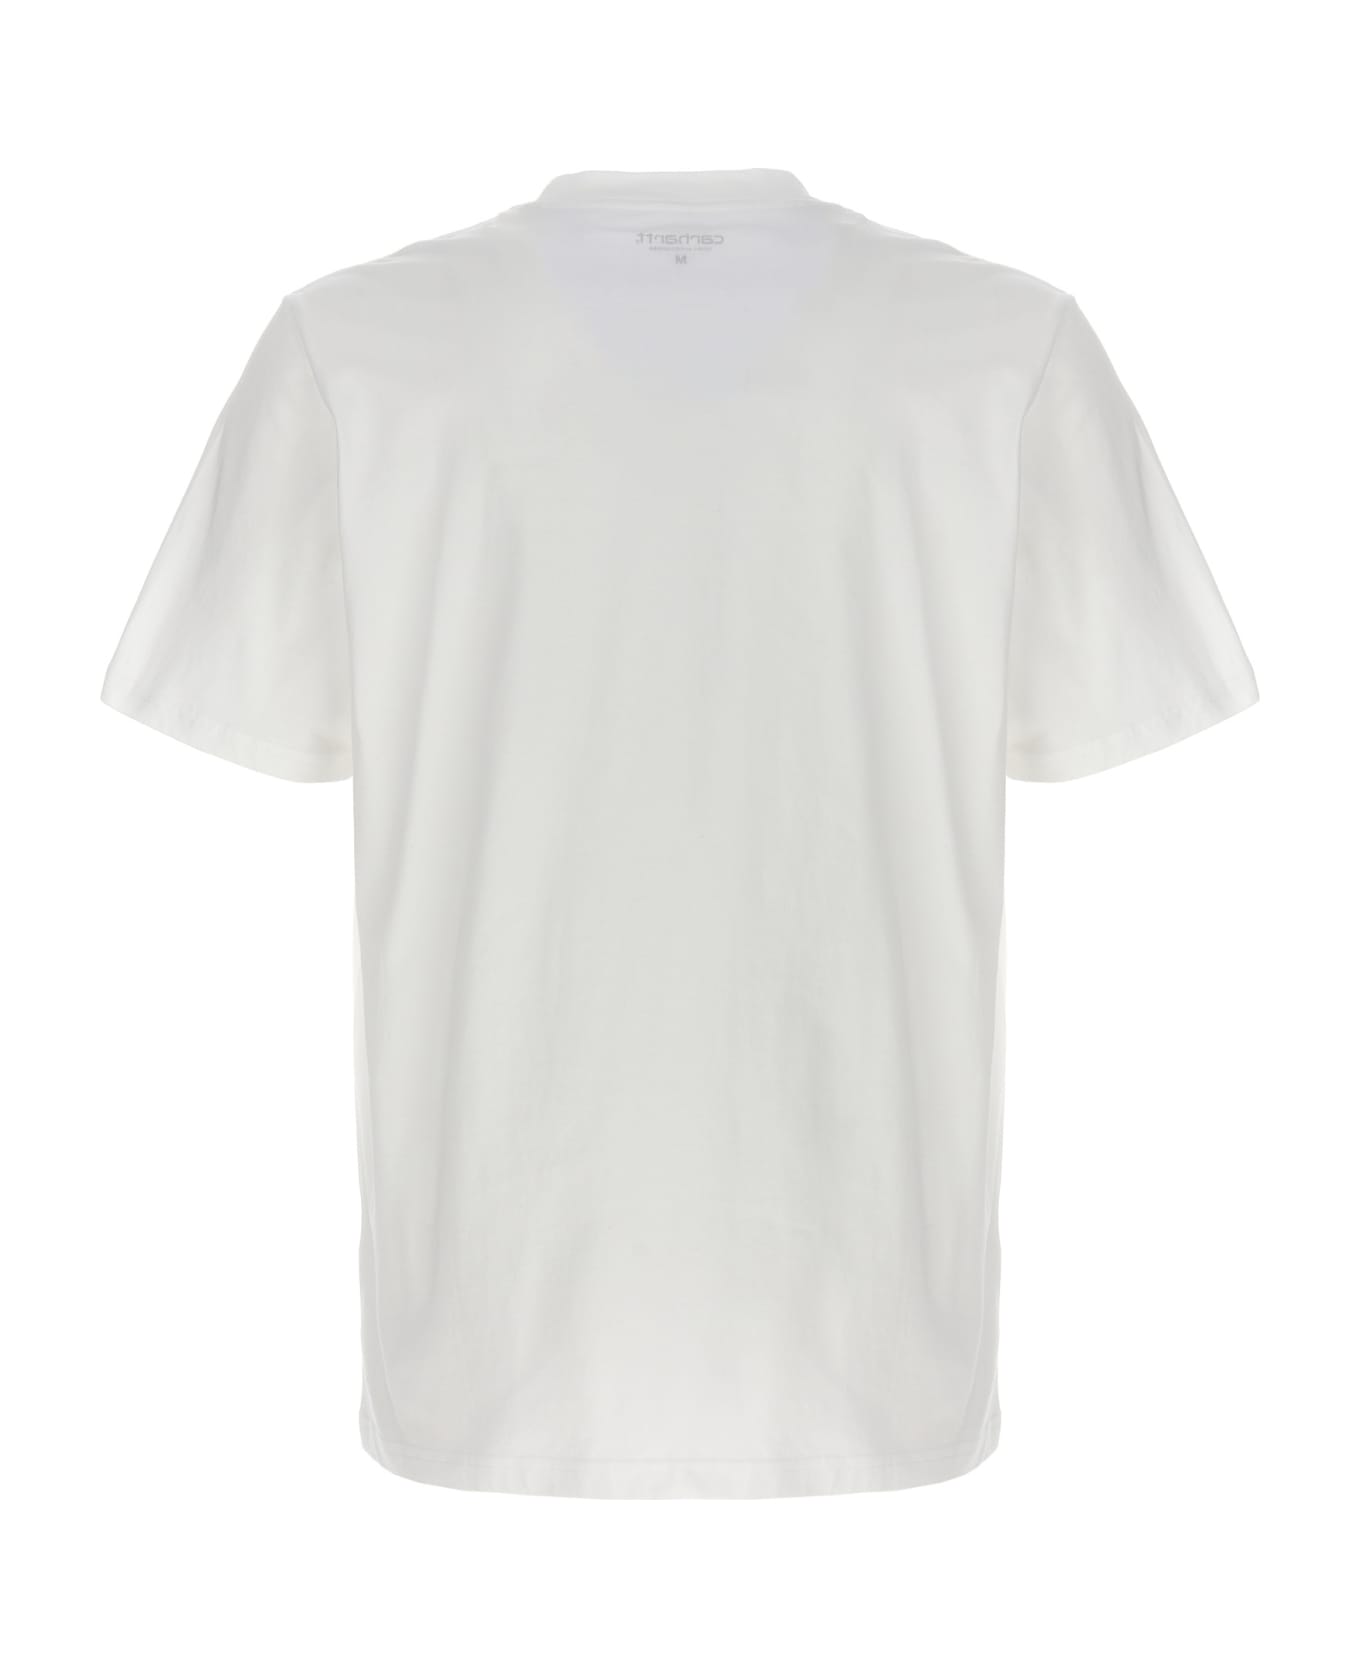 Carhartt WIP 'tools For Life' T-shirt - White シャツ